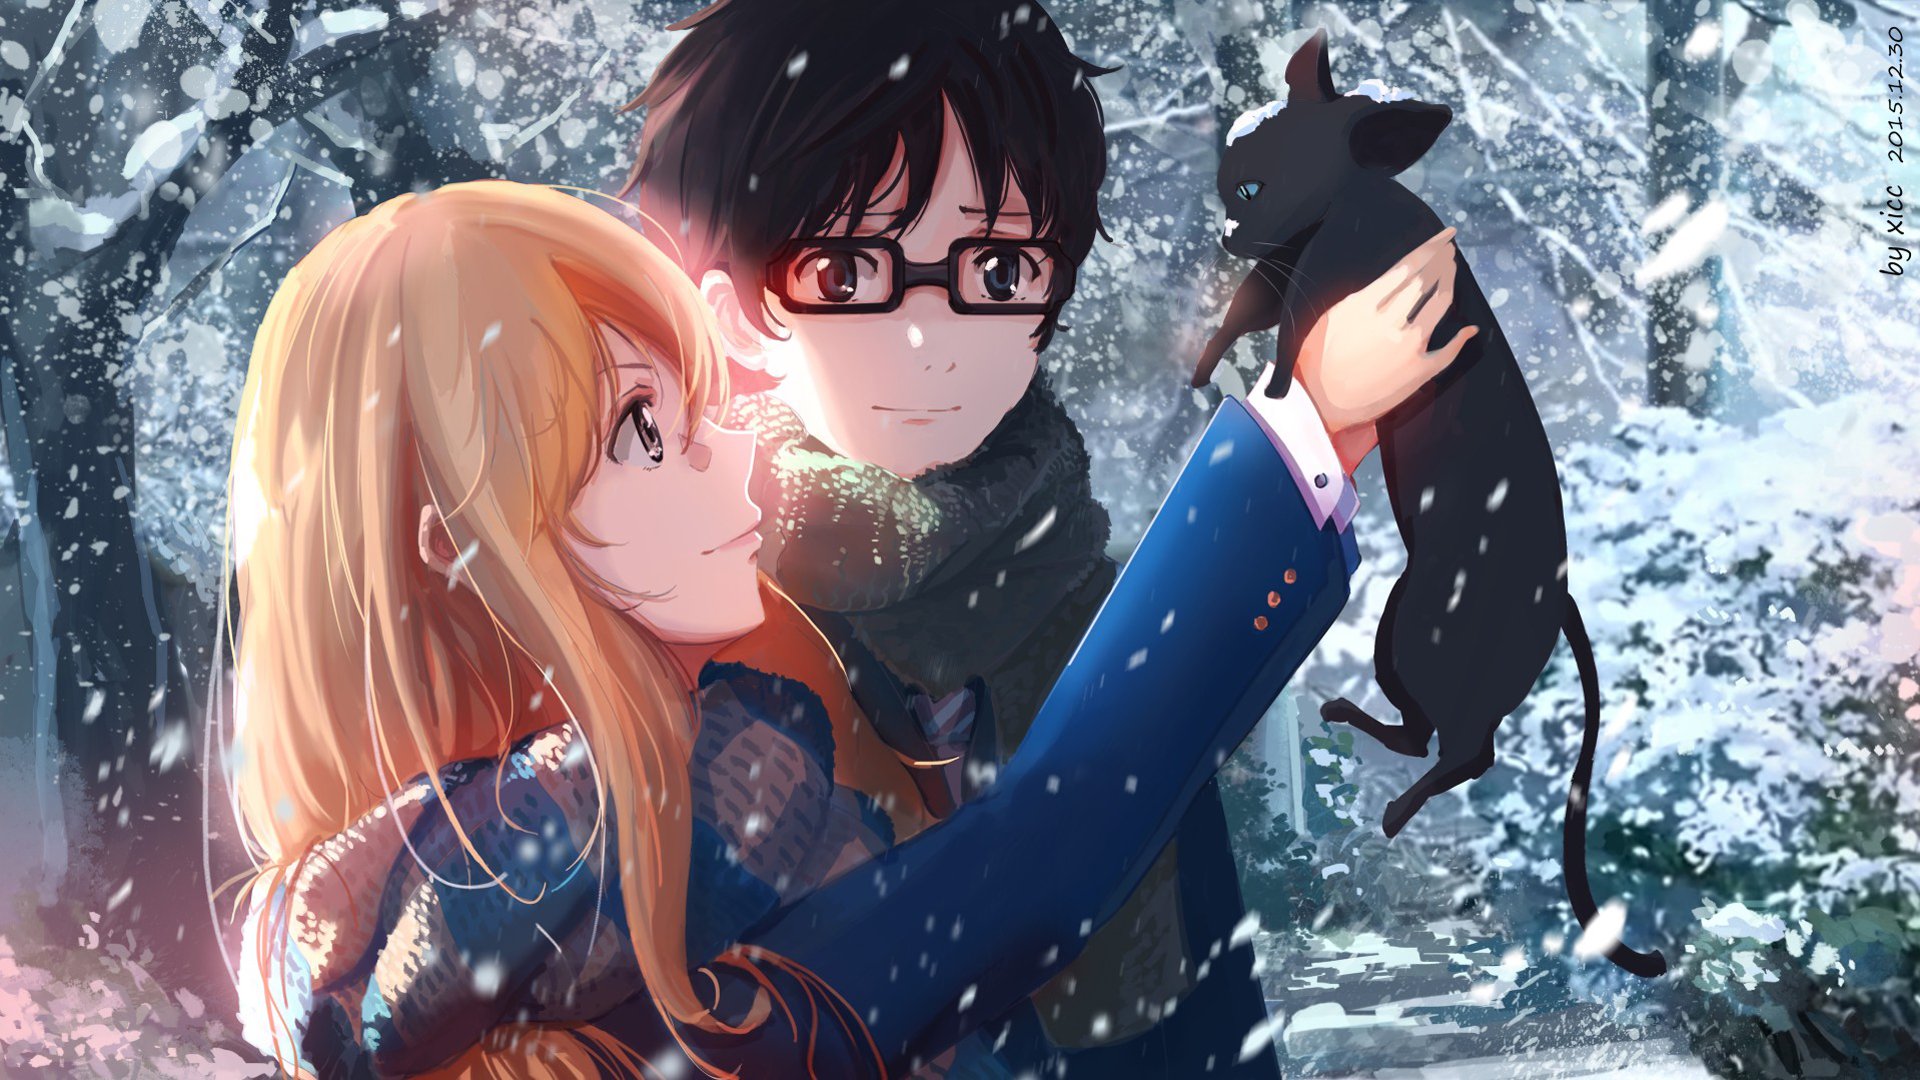 anime, Girl, Blonde, Cat, Cute, Snow, Couple Wallpapers HD